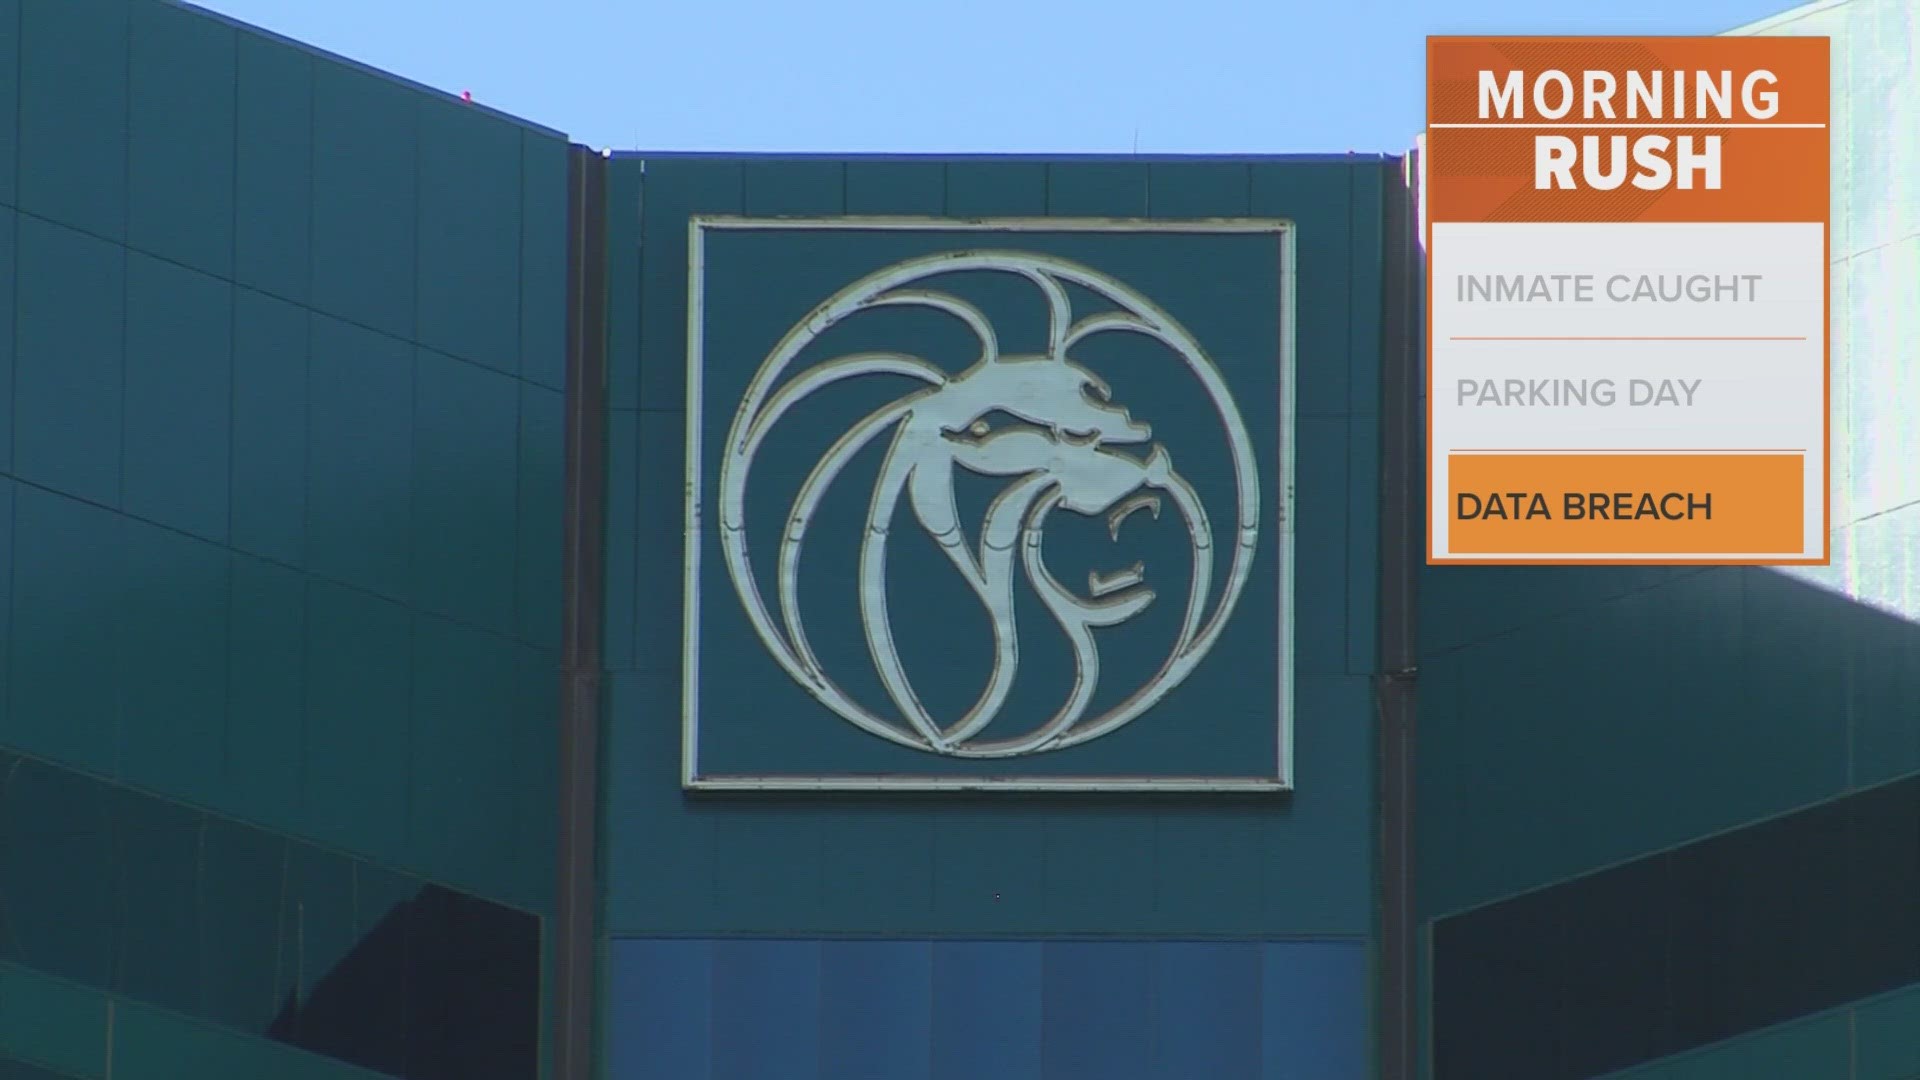 A “cybersecurity issue” led to the shutdown of some casino and hotel computer systems at MGM Resorts International properties across the U.S.